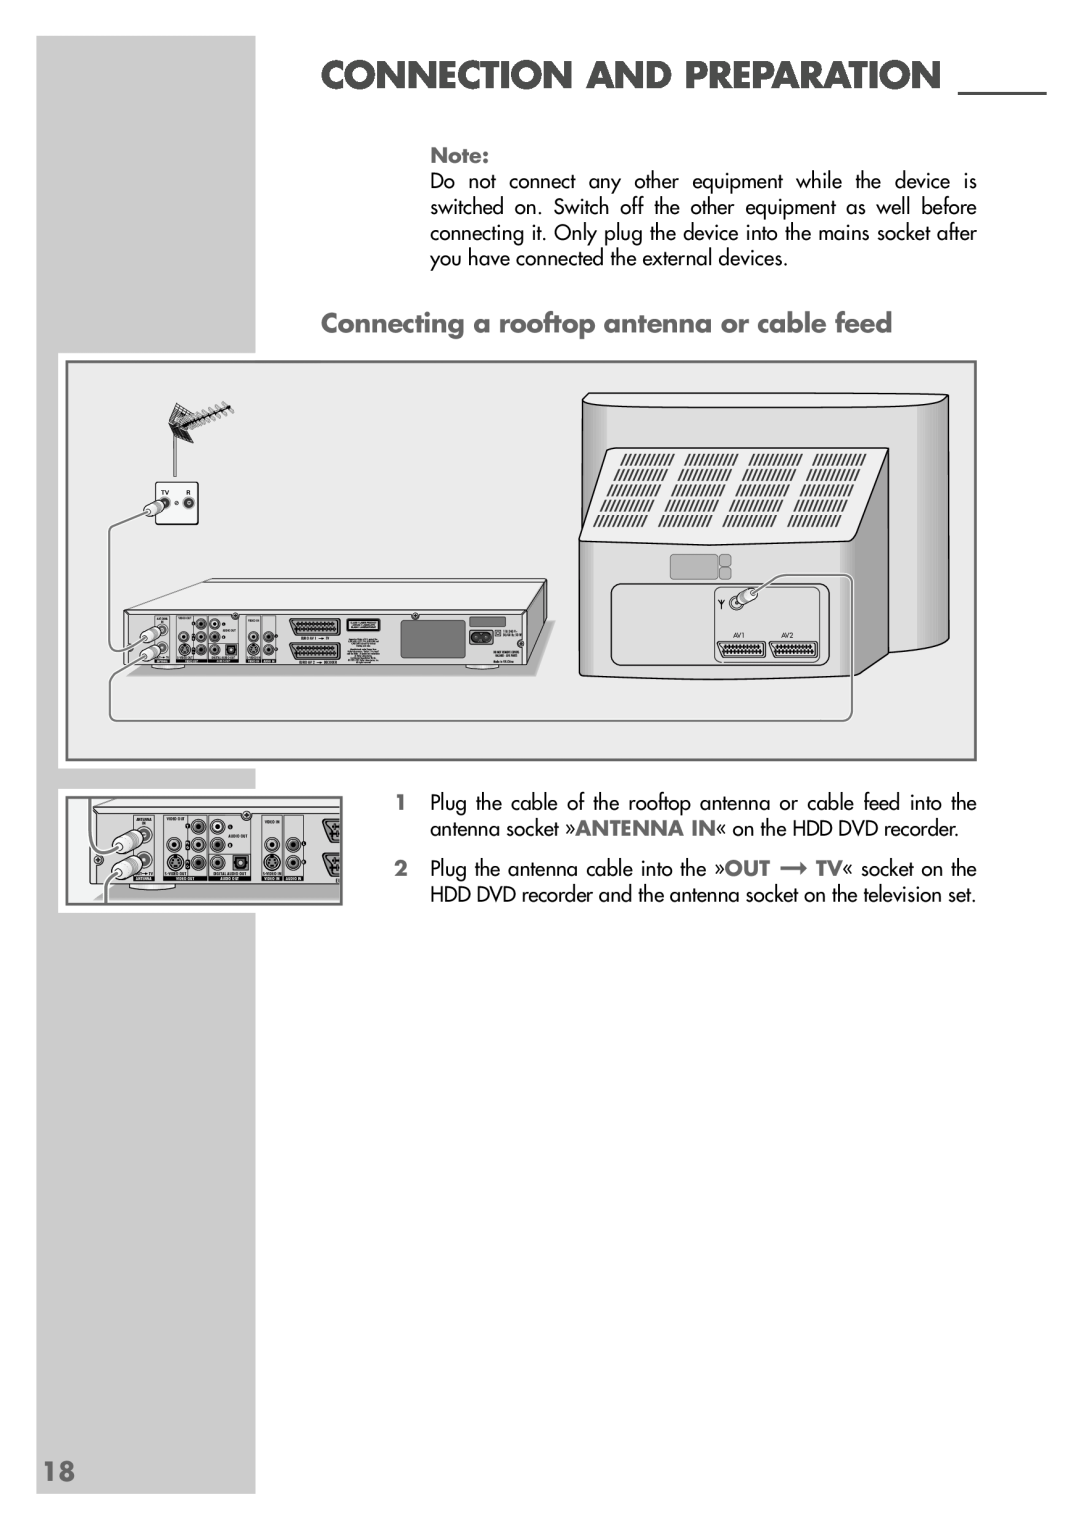 Grundig 5550 HDD manual Connection And Preparation, Connecting a rooftop antenna or cable feed 